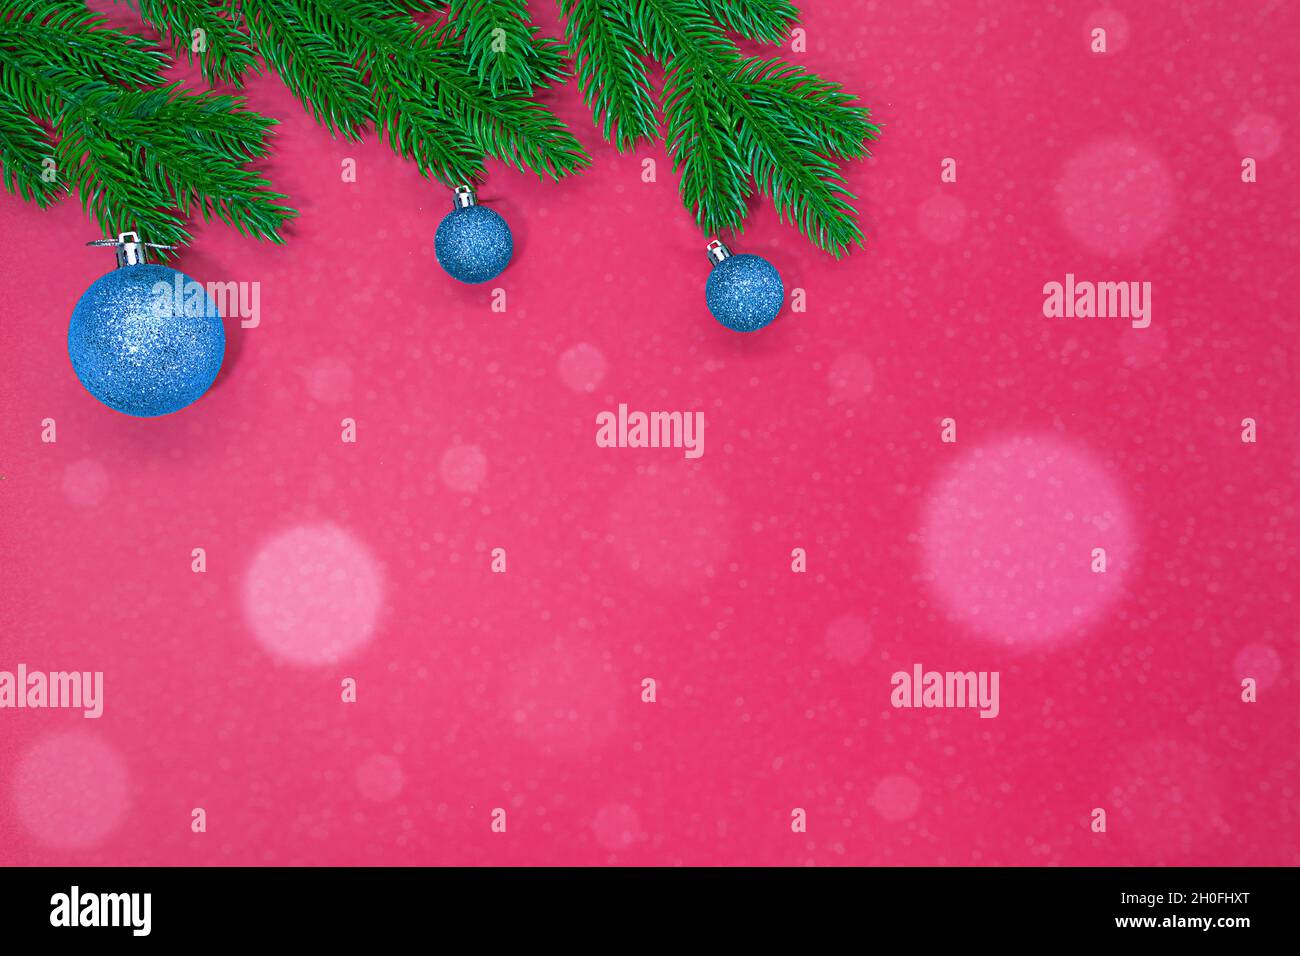 Spruce branches with blue Christmas tree shiny toys on pink background with snow bokeh. Copy space Stock Photo